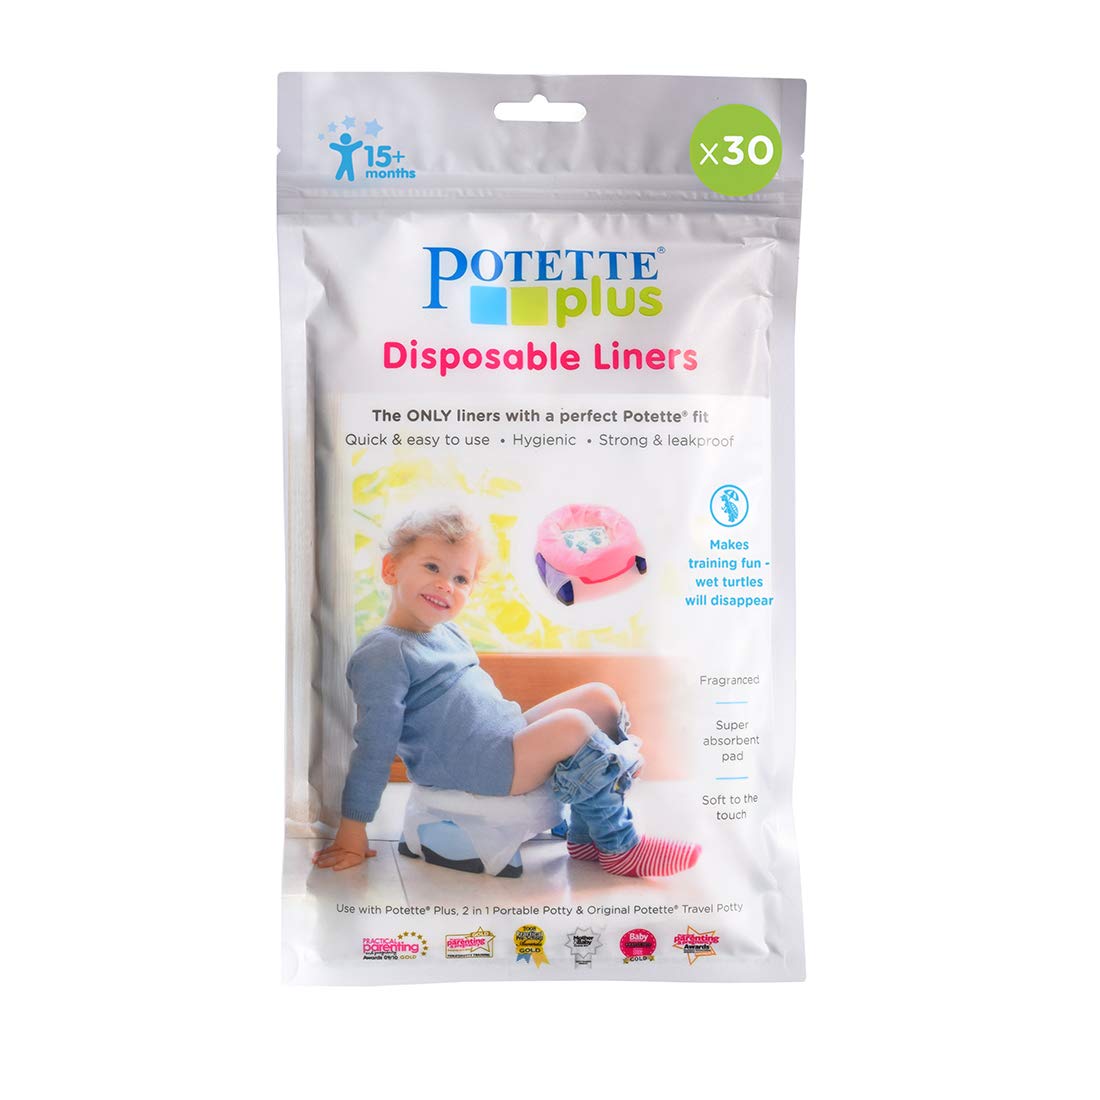 Potette Plus Biodegradable Liners (30 pack)